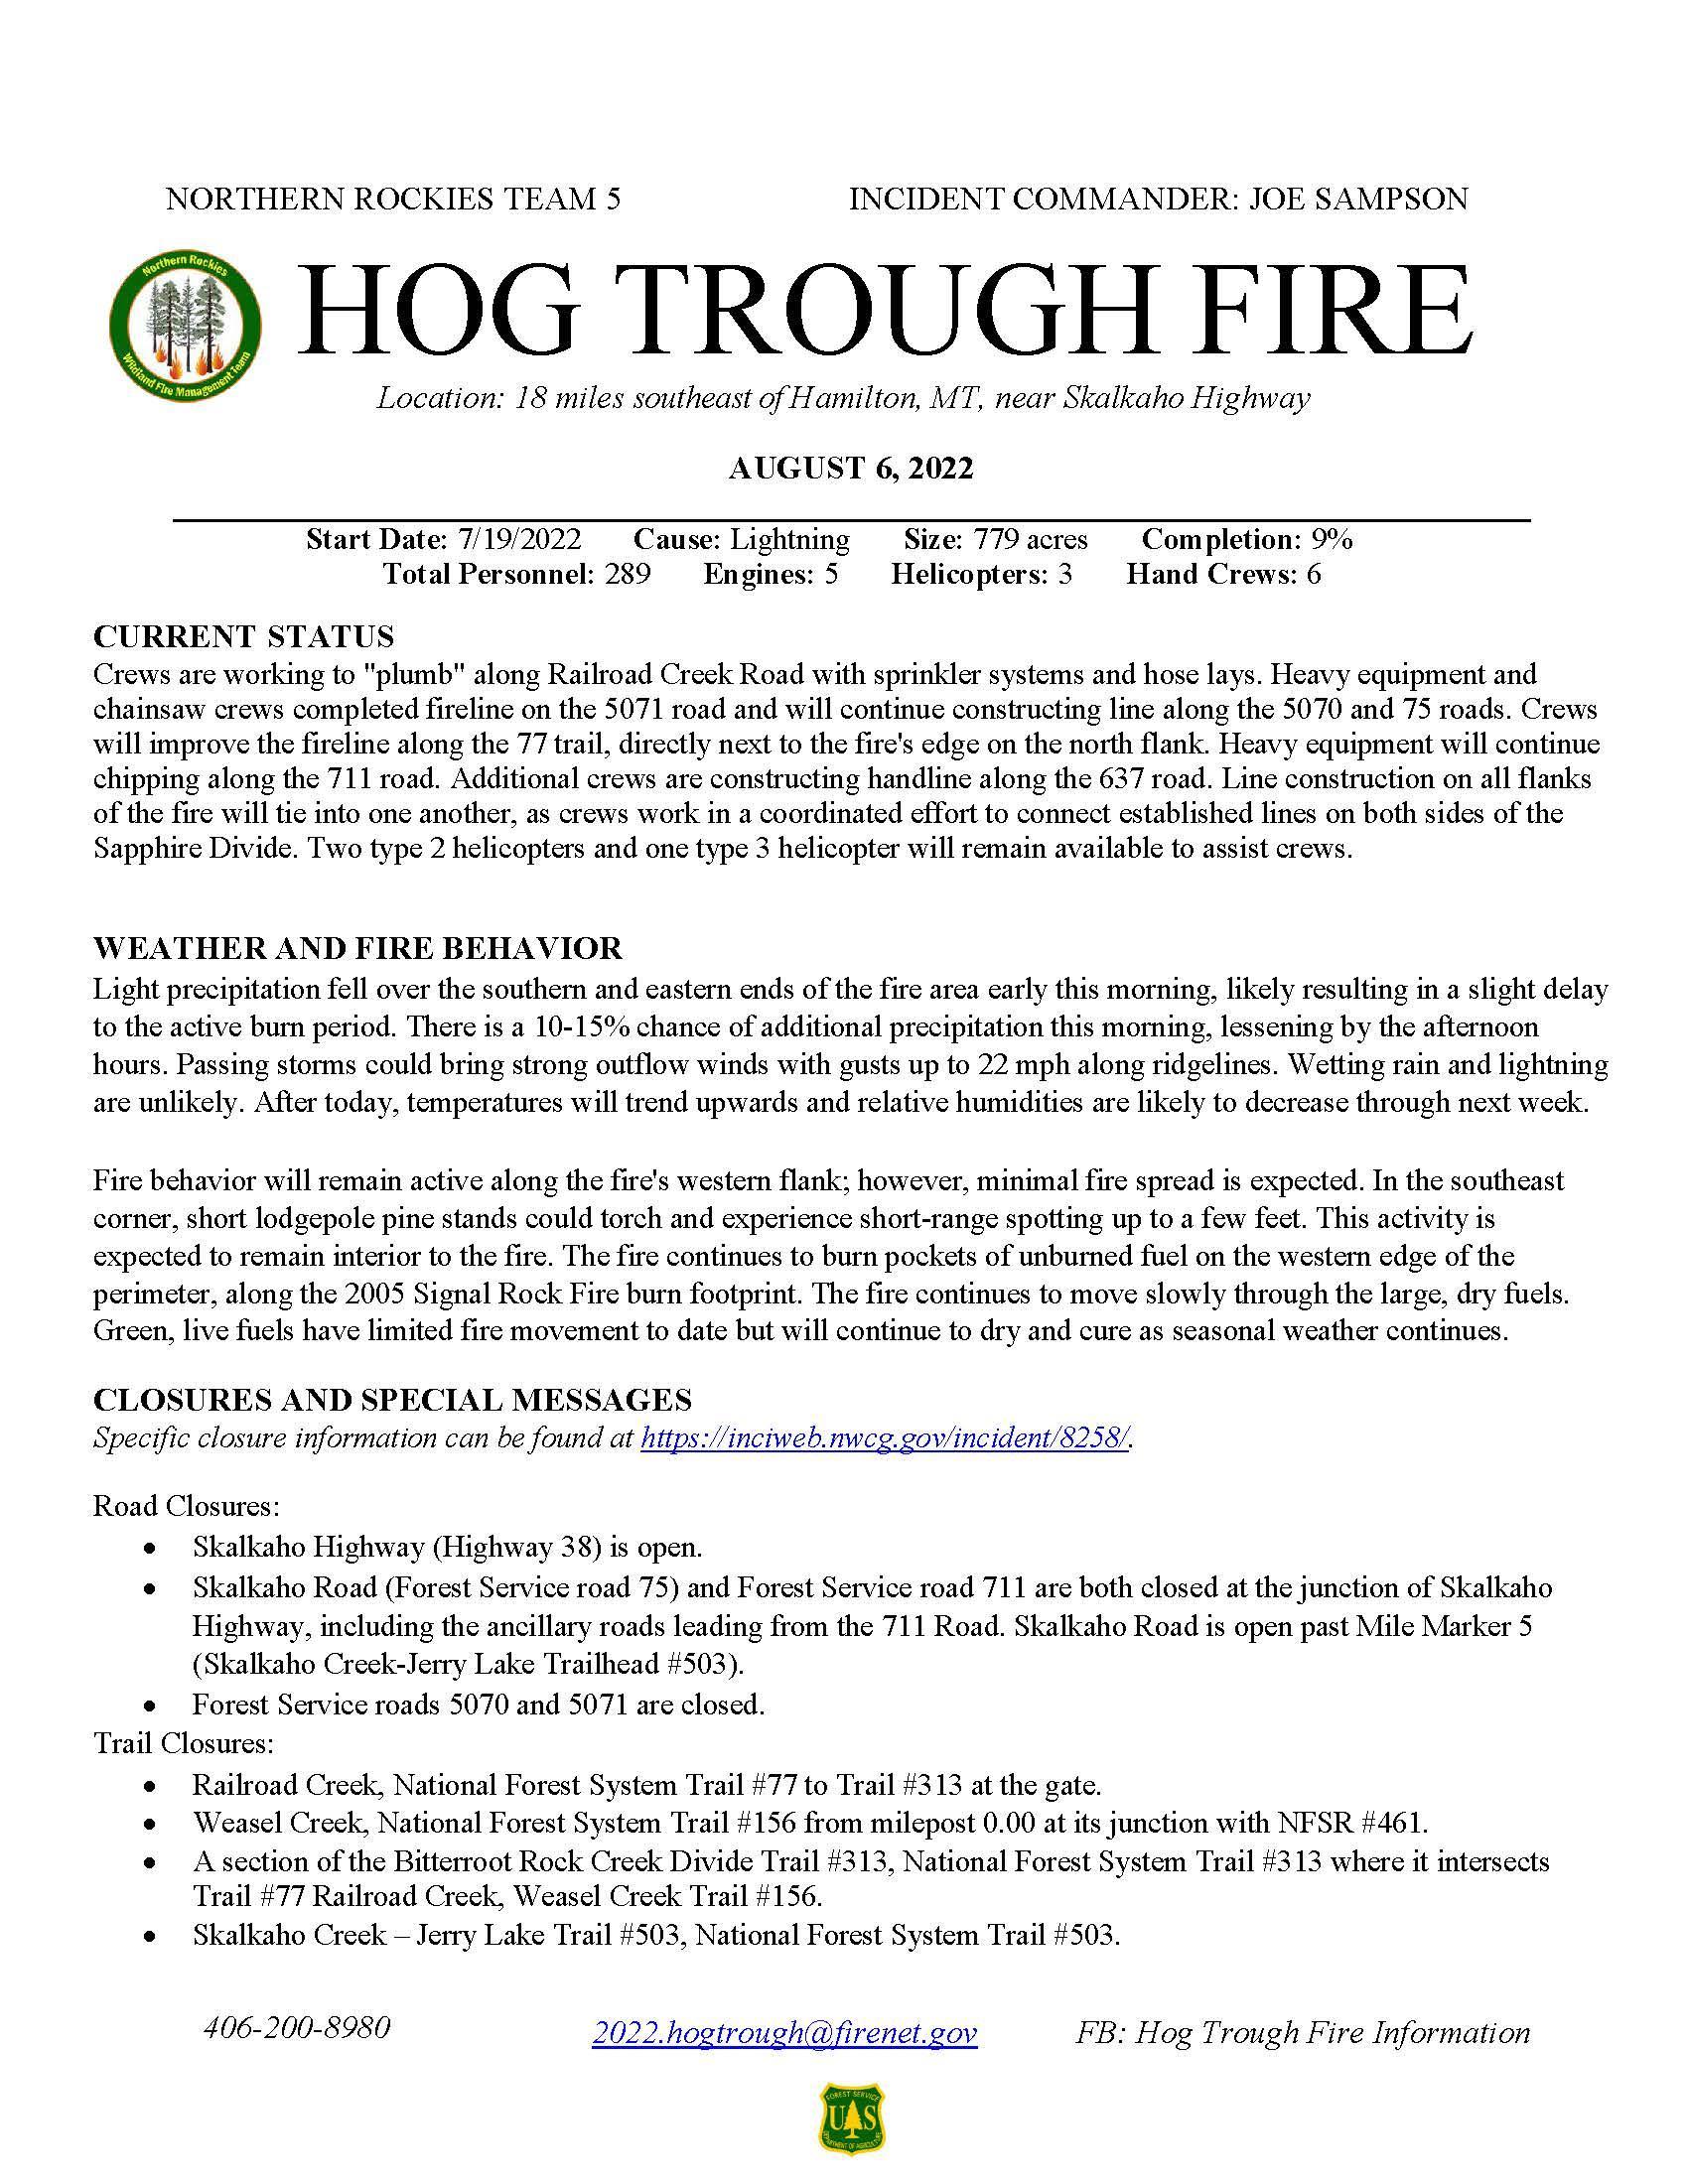 Hog Trough Fire Daily Update for August 6